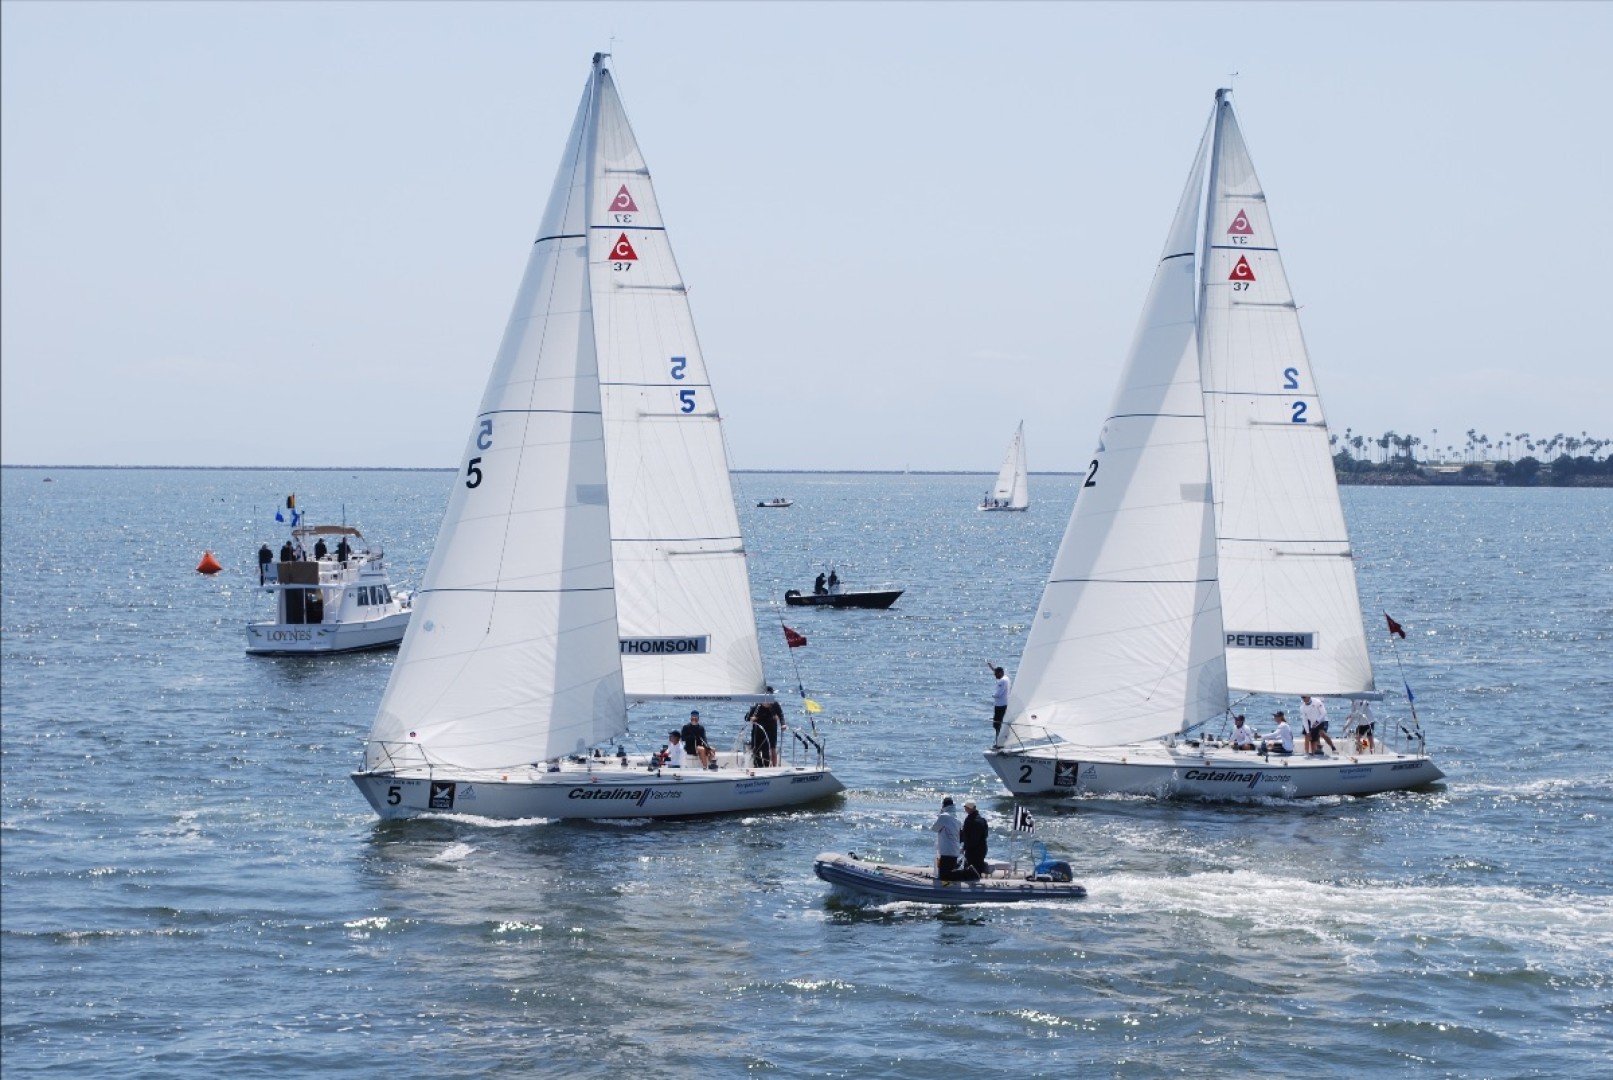 Jeffrey Petersen undefeated on day one of ficker cup regatta at long Beach Yacht Club